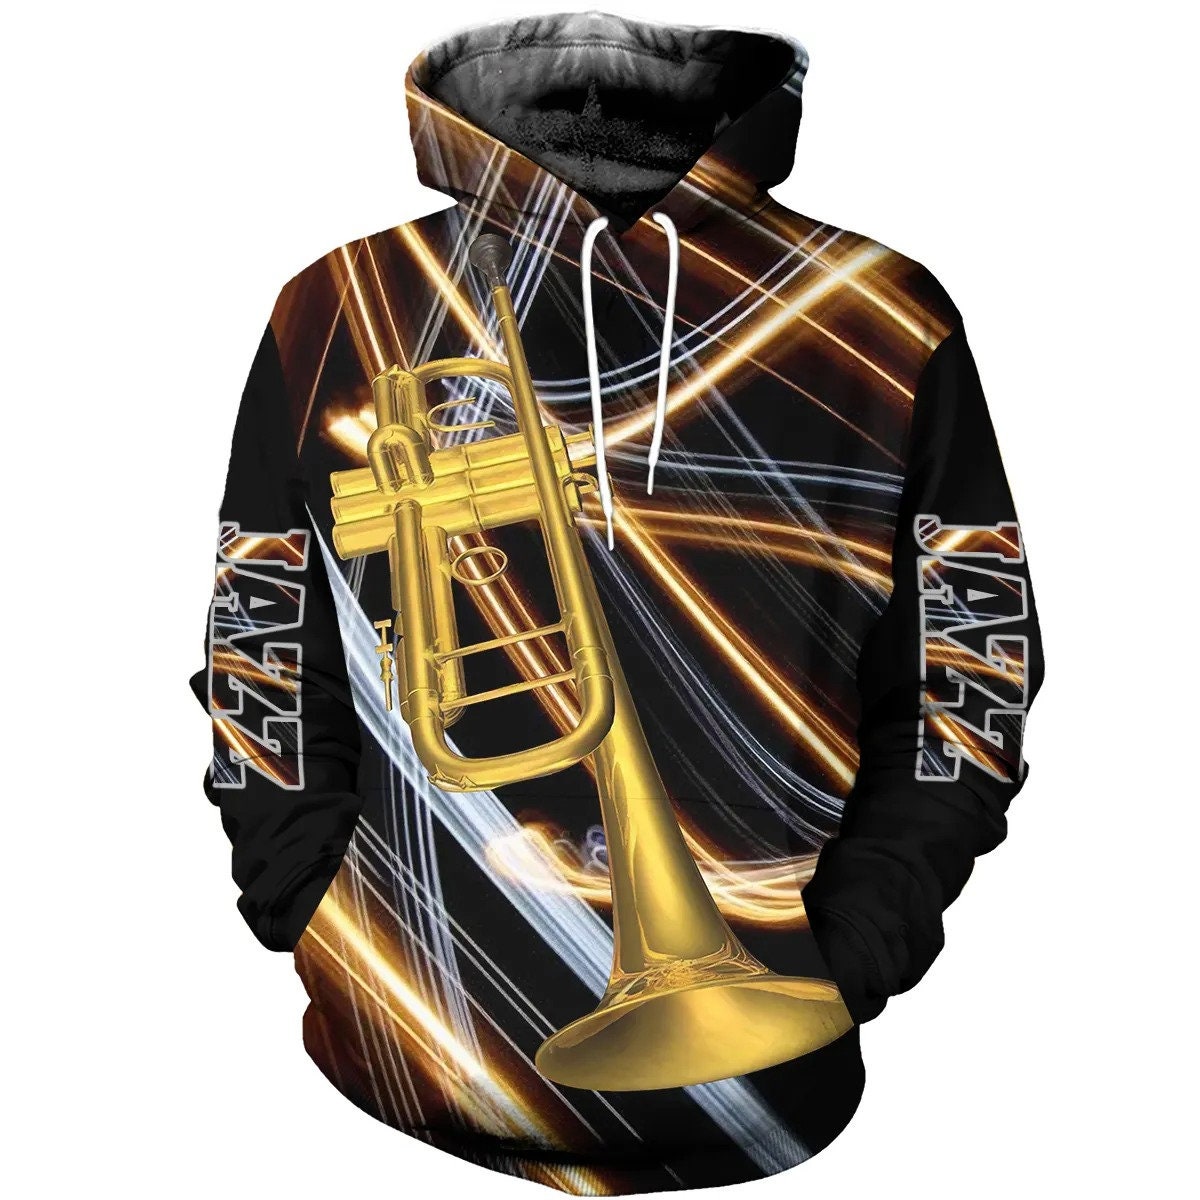 3Ds Alls Overs Printeds Jazzs Arts Trumpets AOPs Unisexs Hoodies